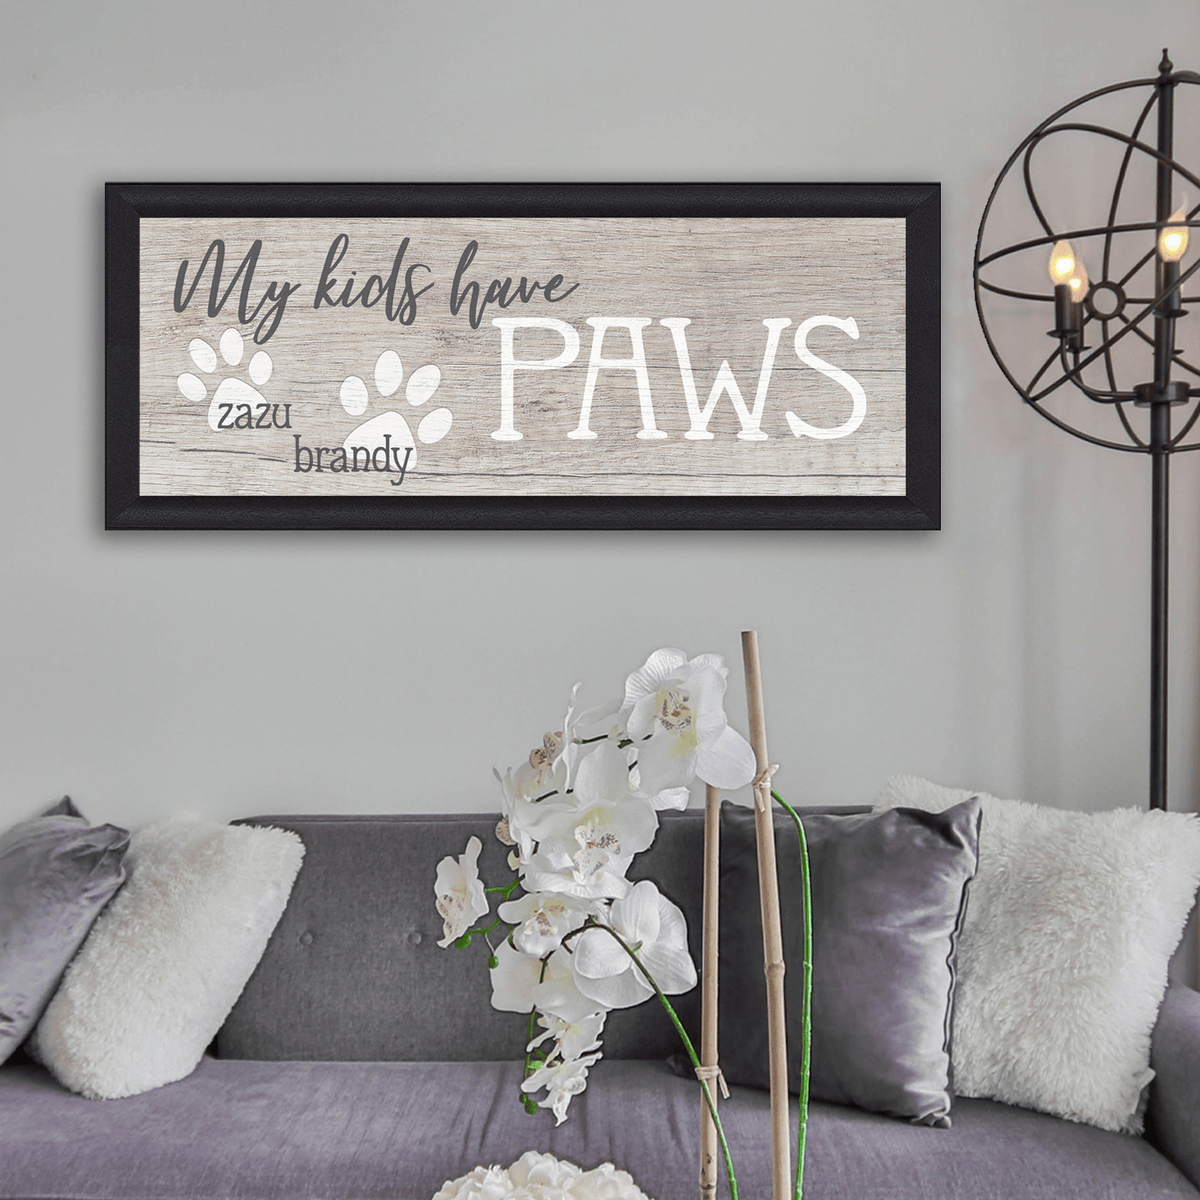 fun decor for pet owners from Personal Prints